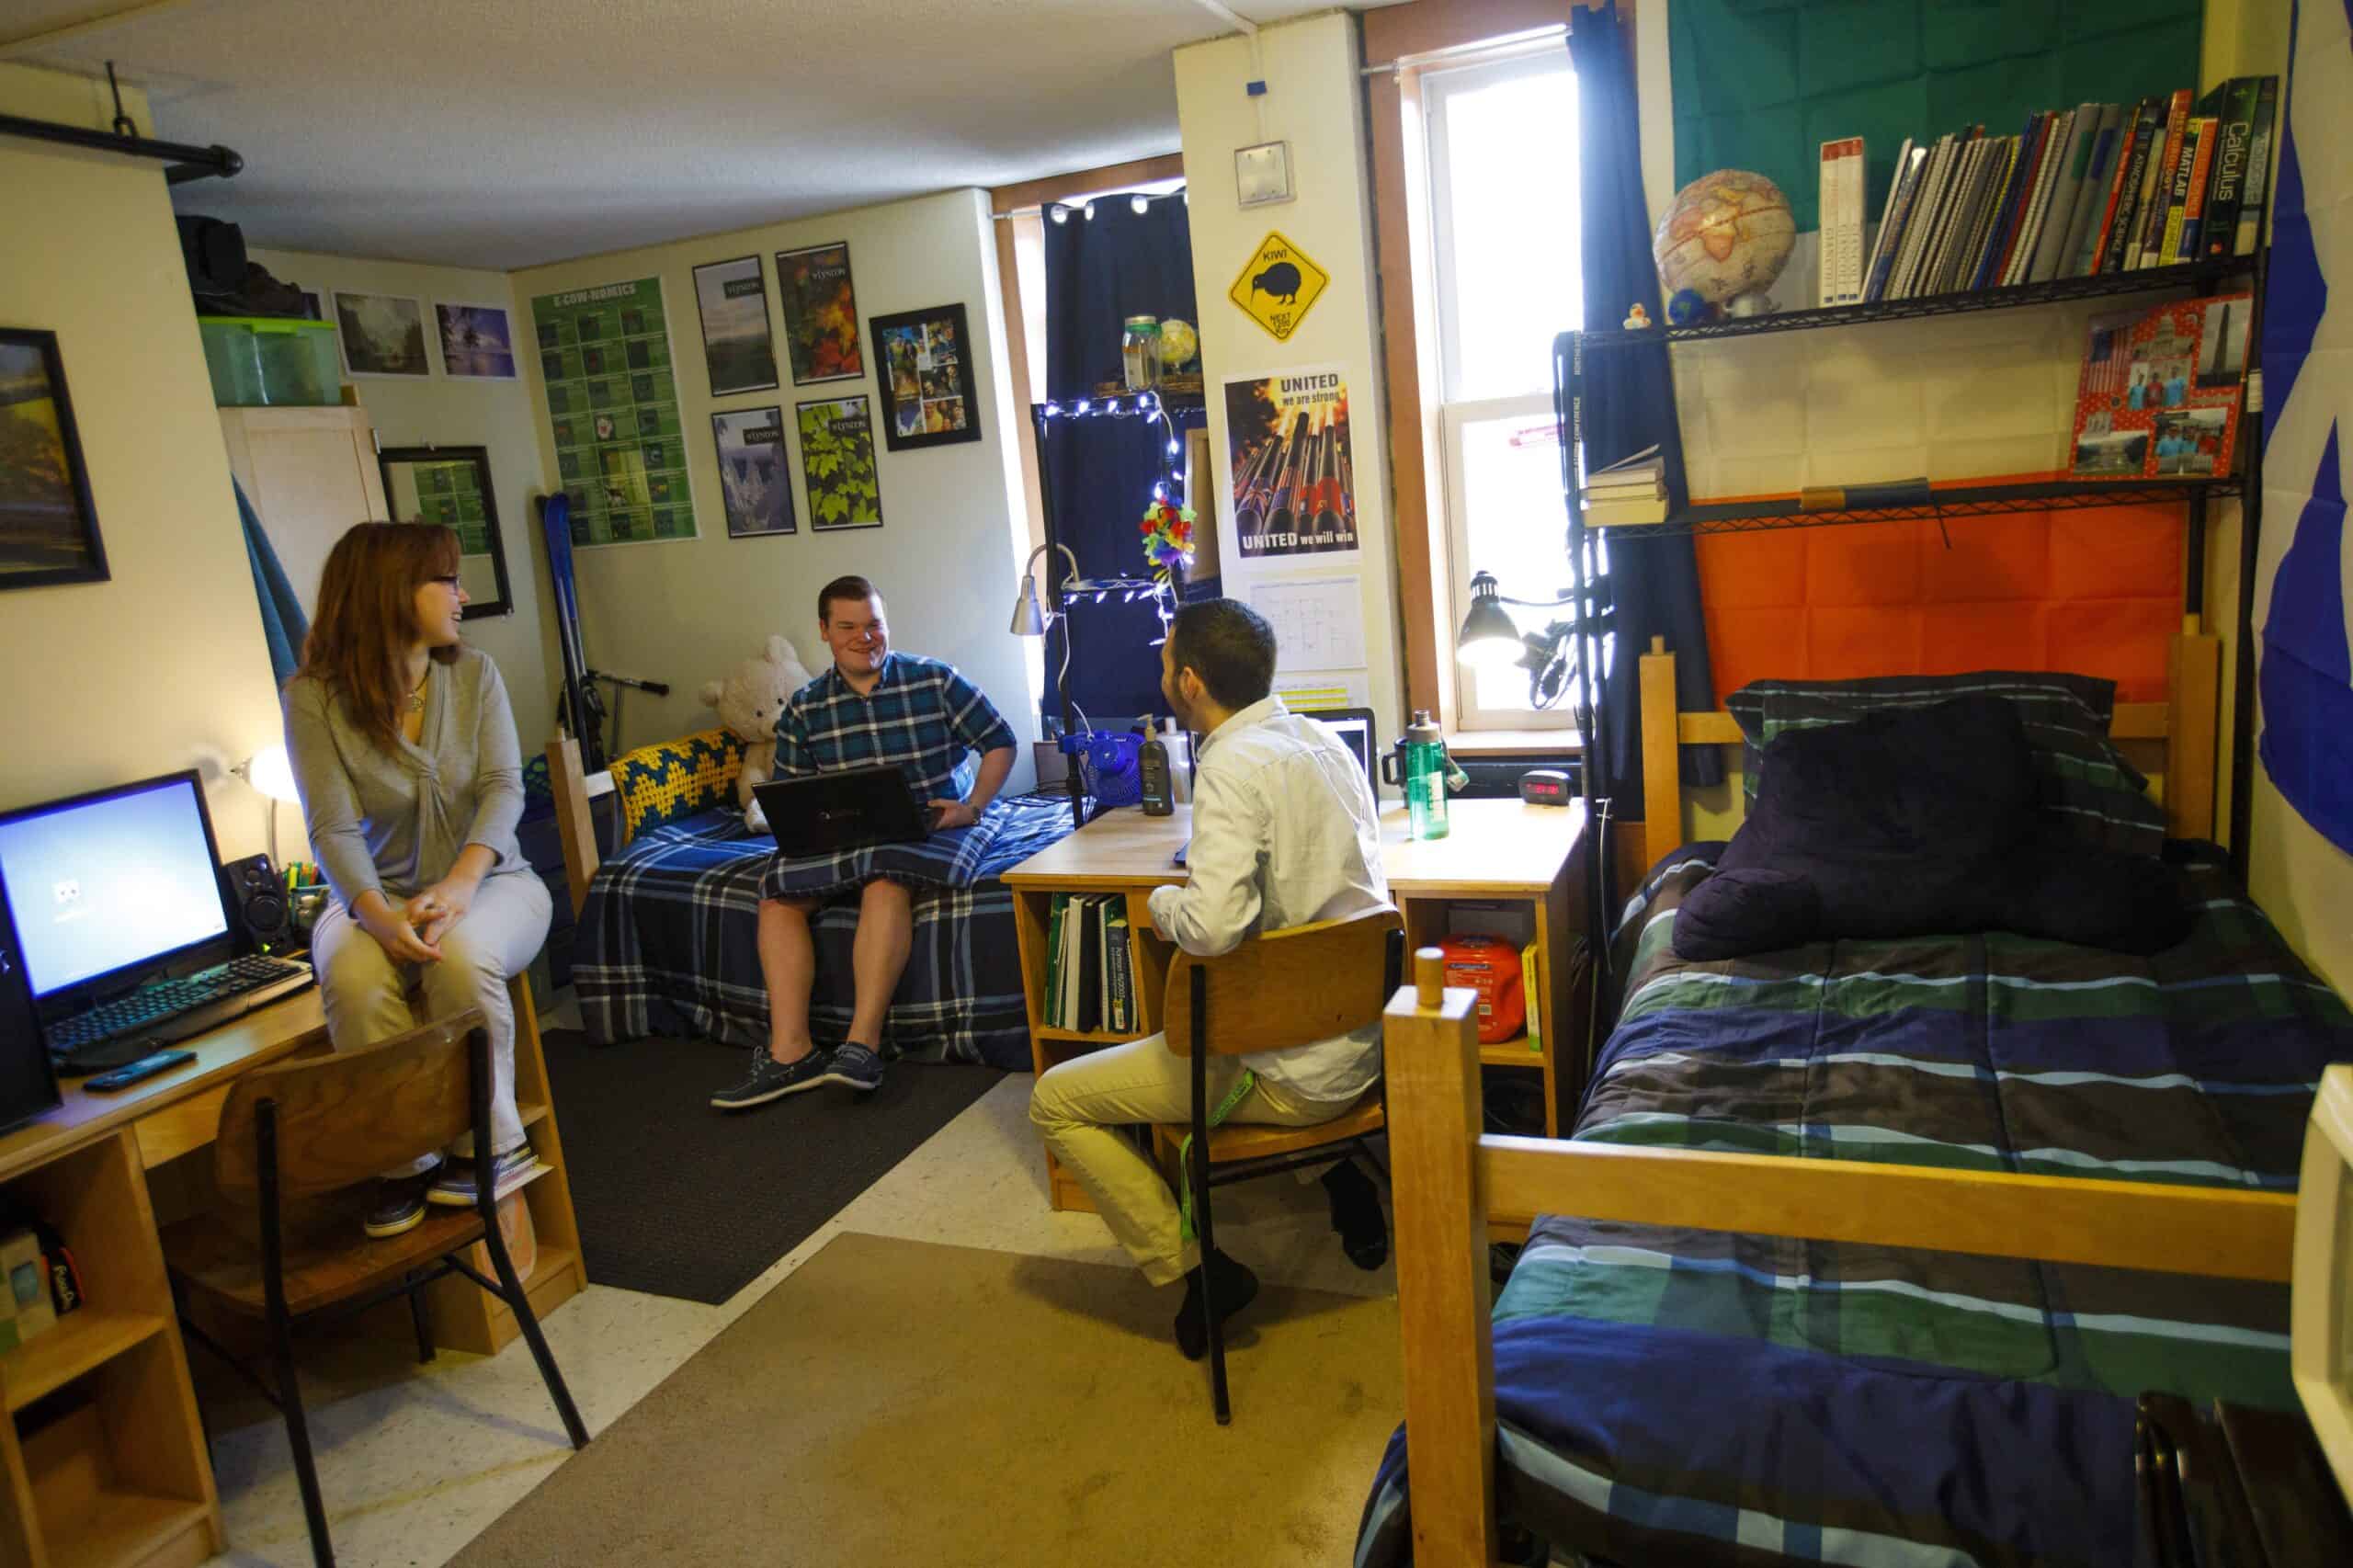 Two young guys and one girl are sitting in a dorm room having a conversation. The dorm room has two beds and two desks.